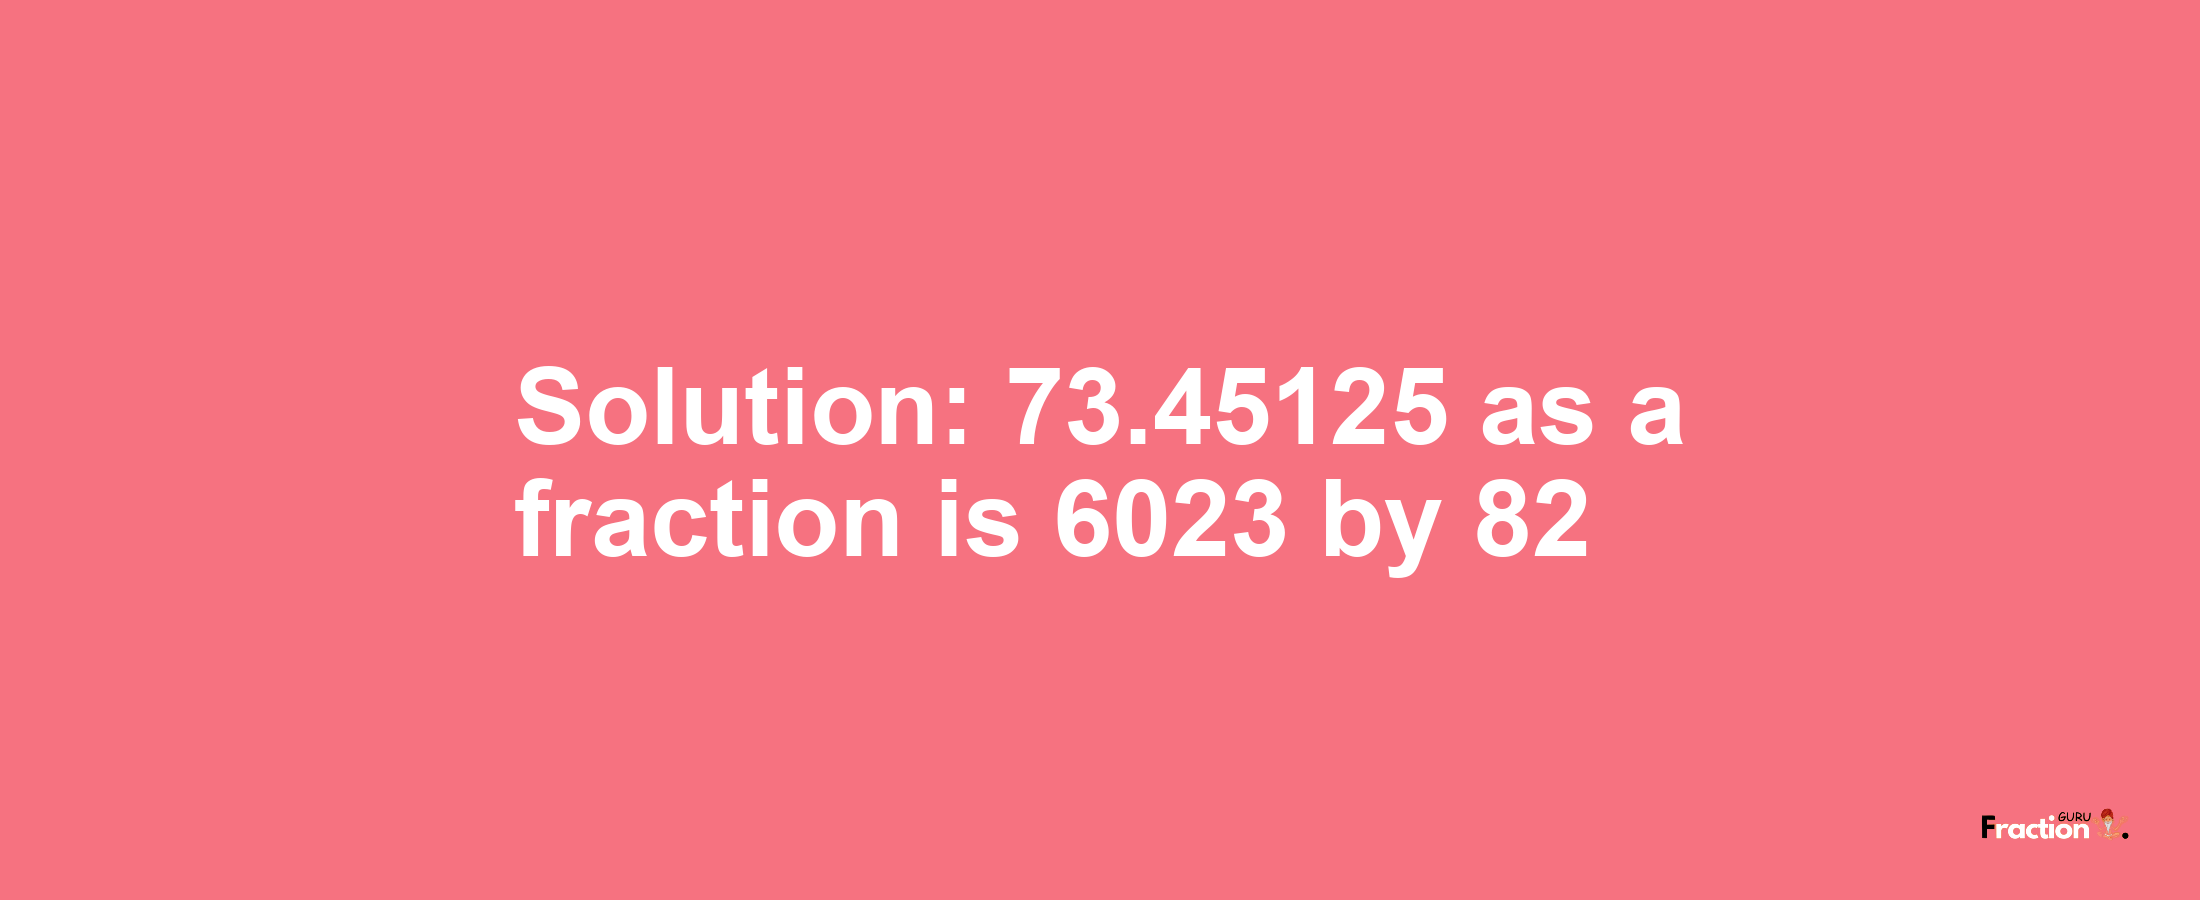 Solution:73.45125 as a fraction is 6023/82